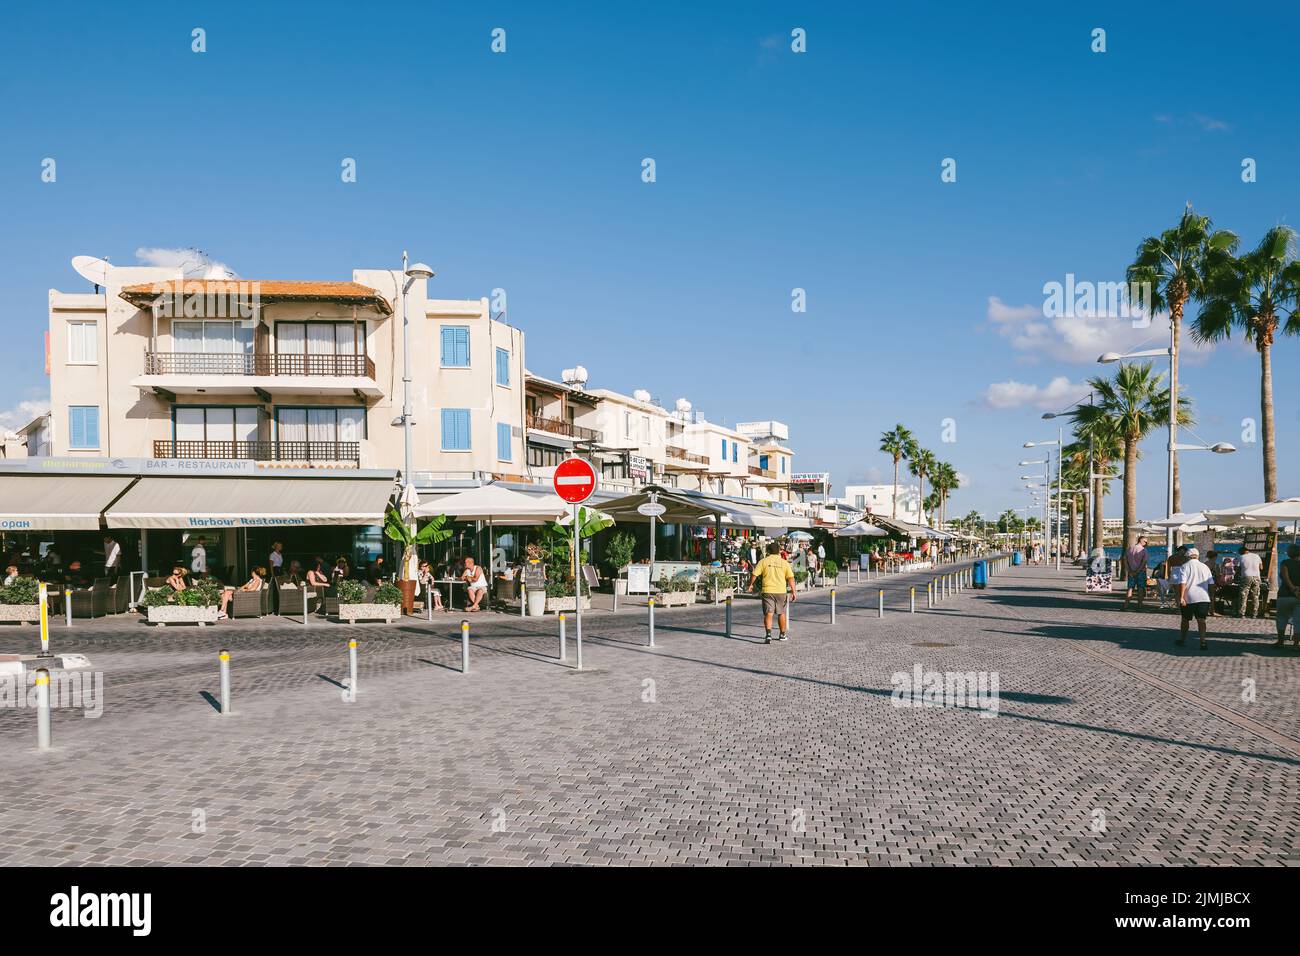 Paphos, Cyprus - Oct 29, 2014: Poseidonos Ave, Paphos, Cyprus with people tourists and locals near the Harbour restaurants, souvenir shop tall palm trees Stock Photo